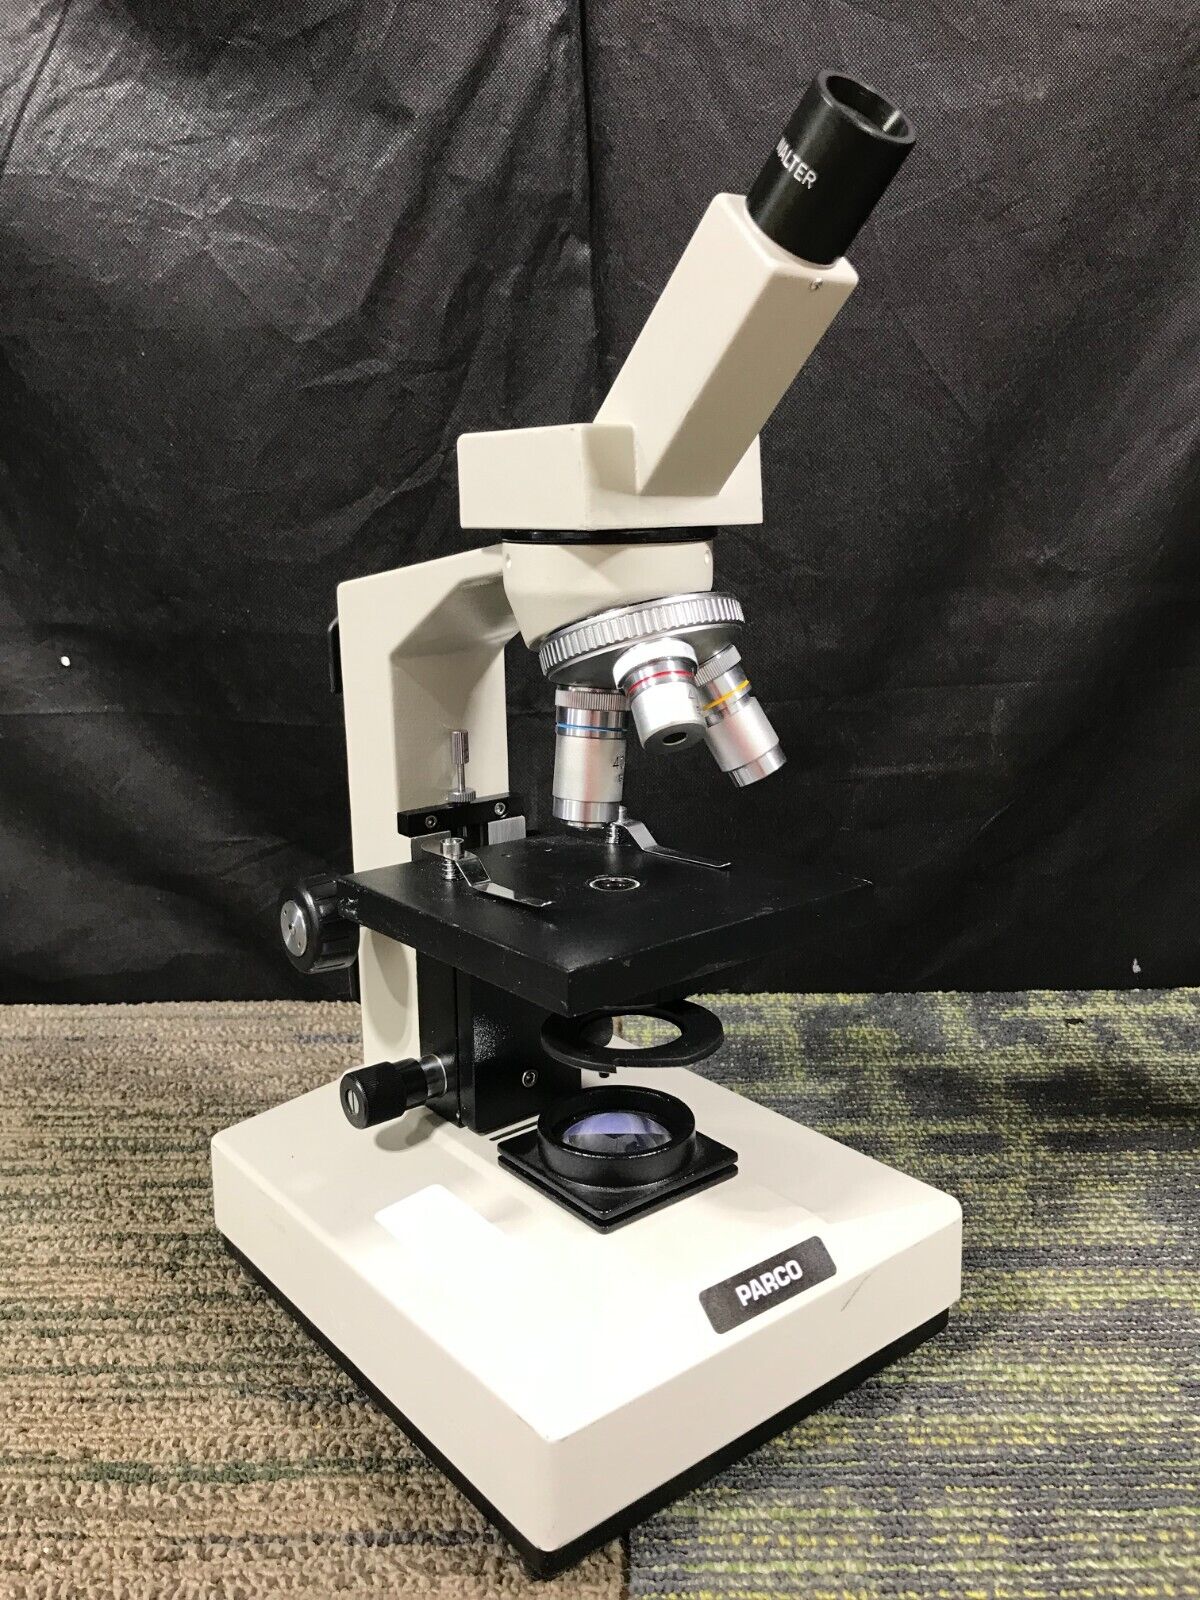 PARCO LTM-300 Monocular Compound Microscope-UNTESTED/FOR PARTS